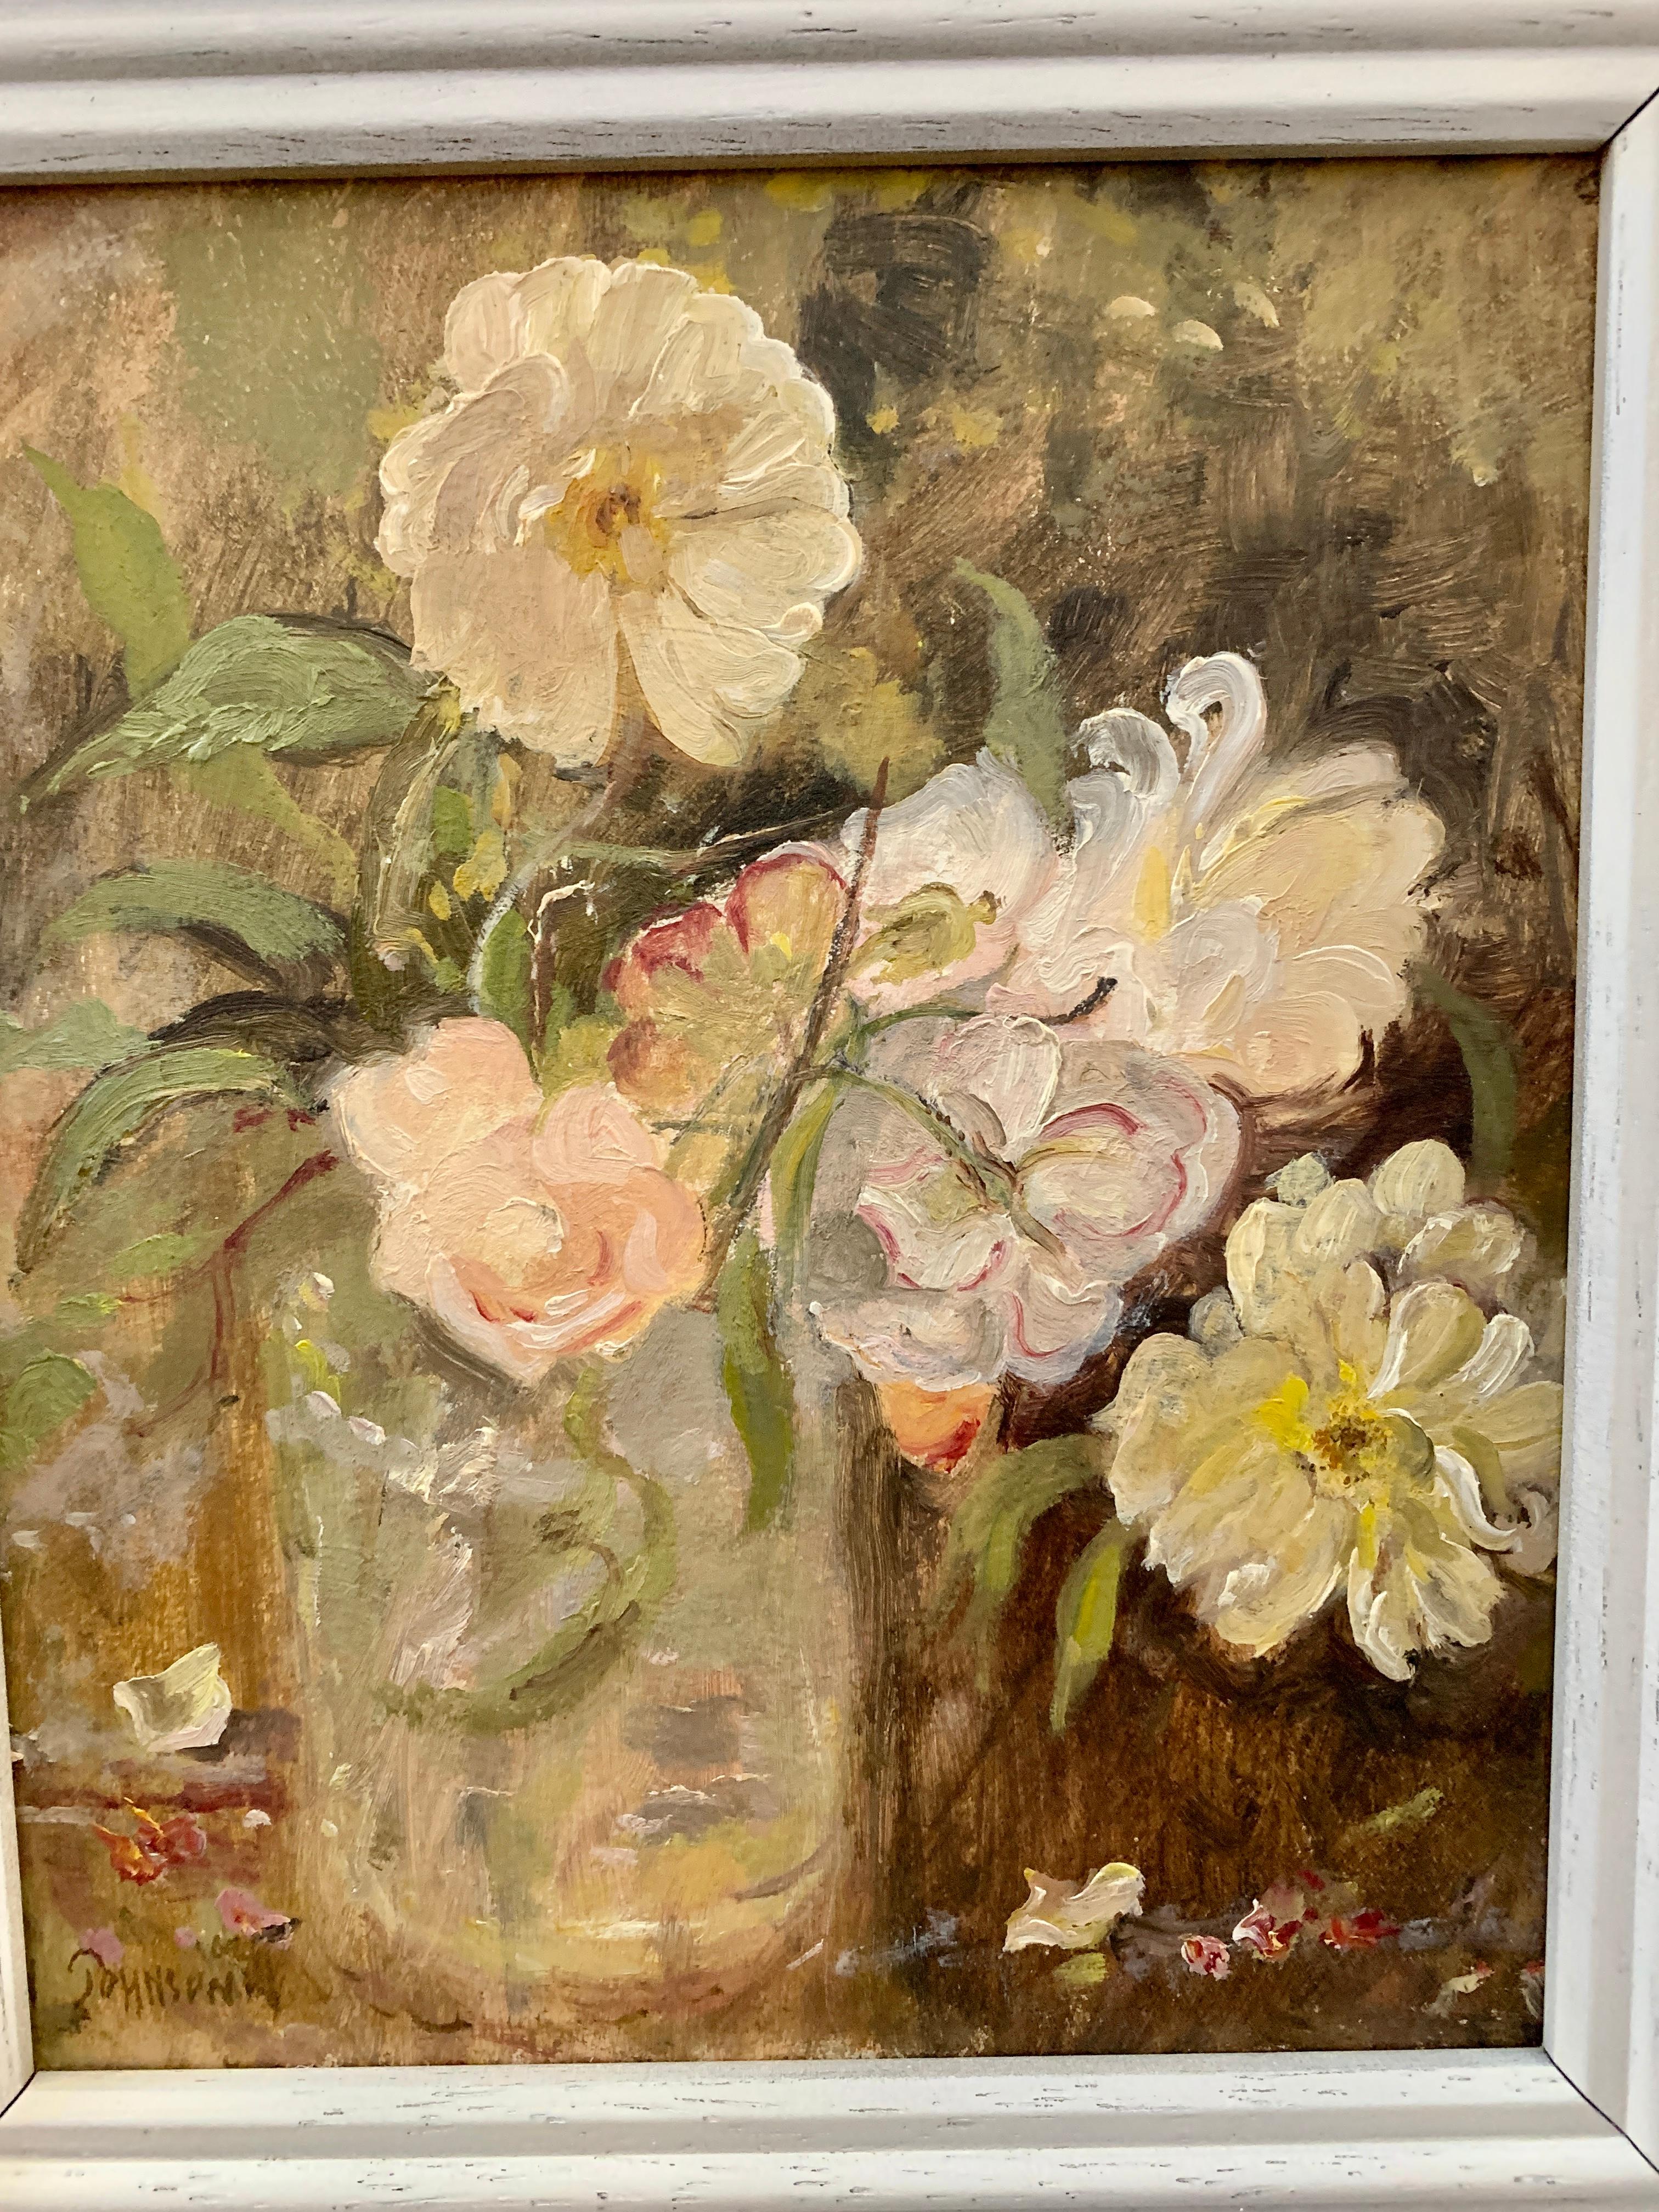 Impressionist English 20th century still life of White and yellow flowers - Painting by Keith Johnson